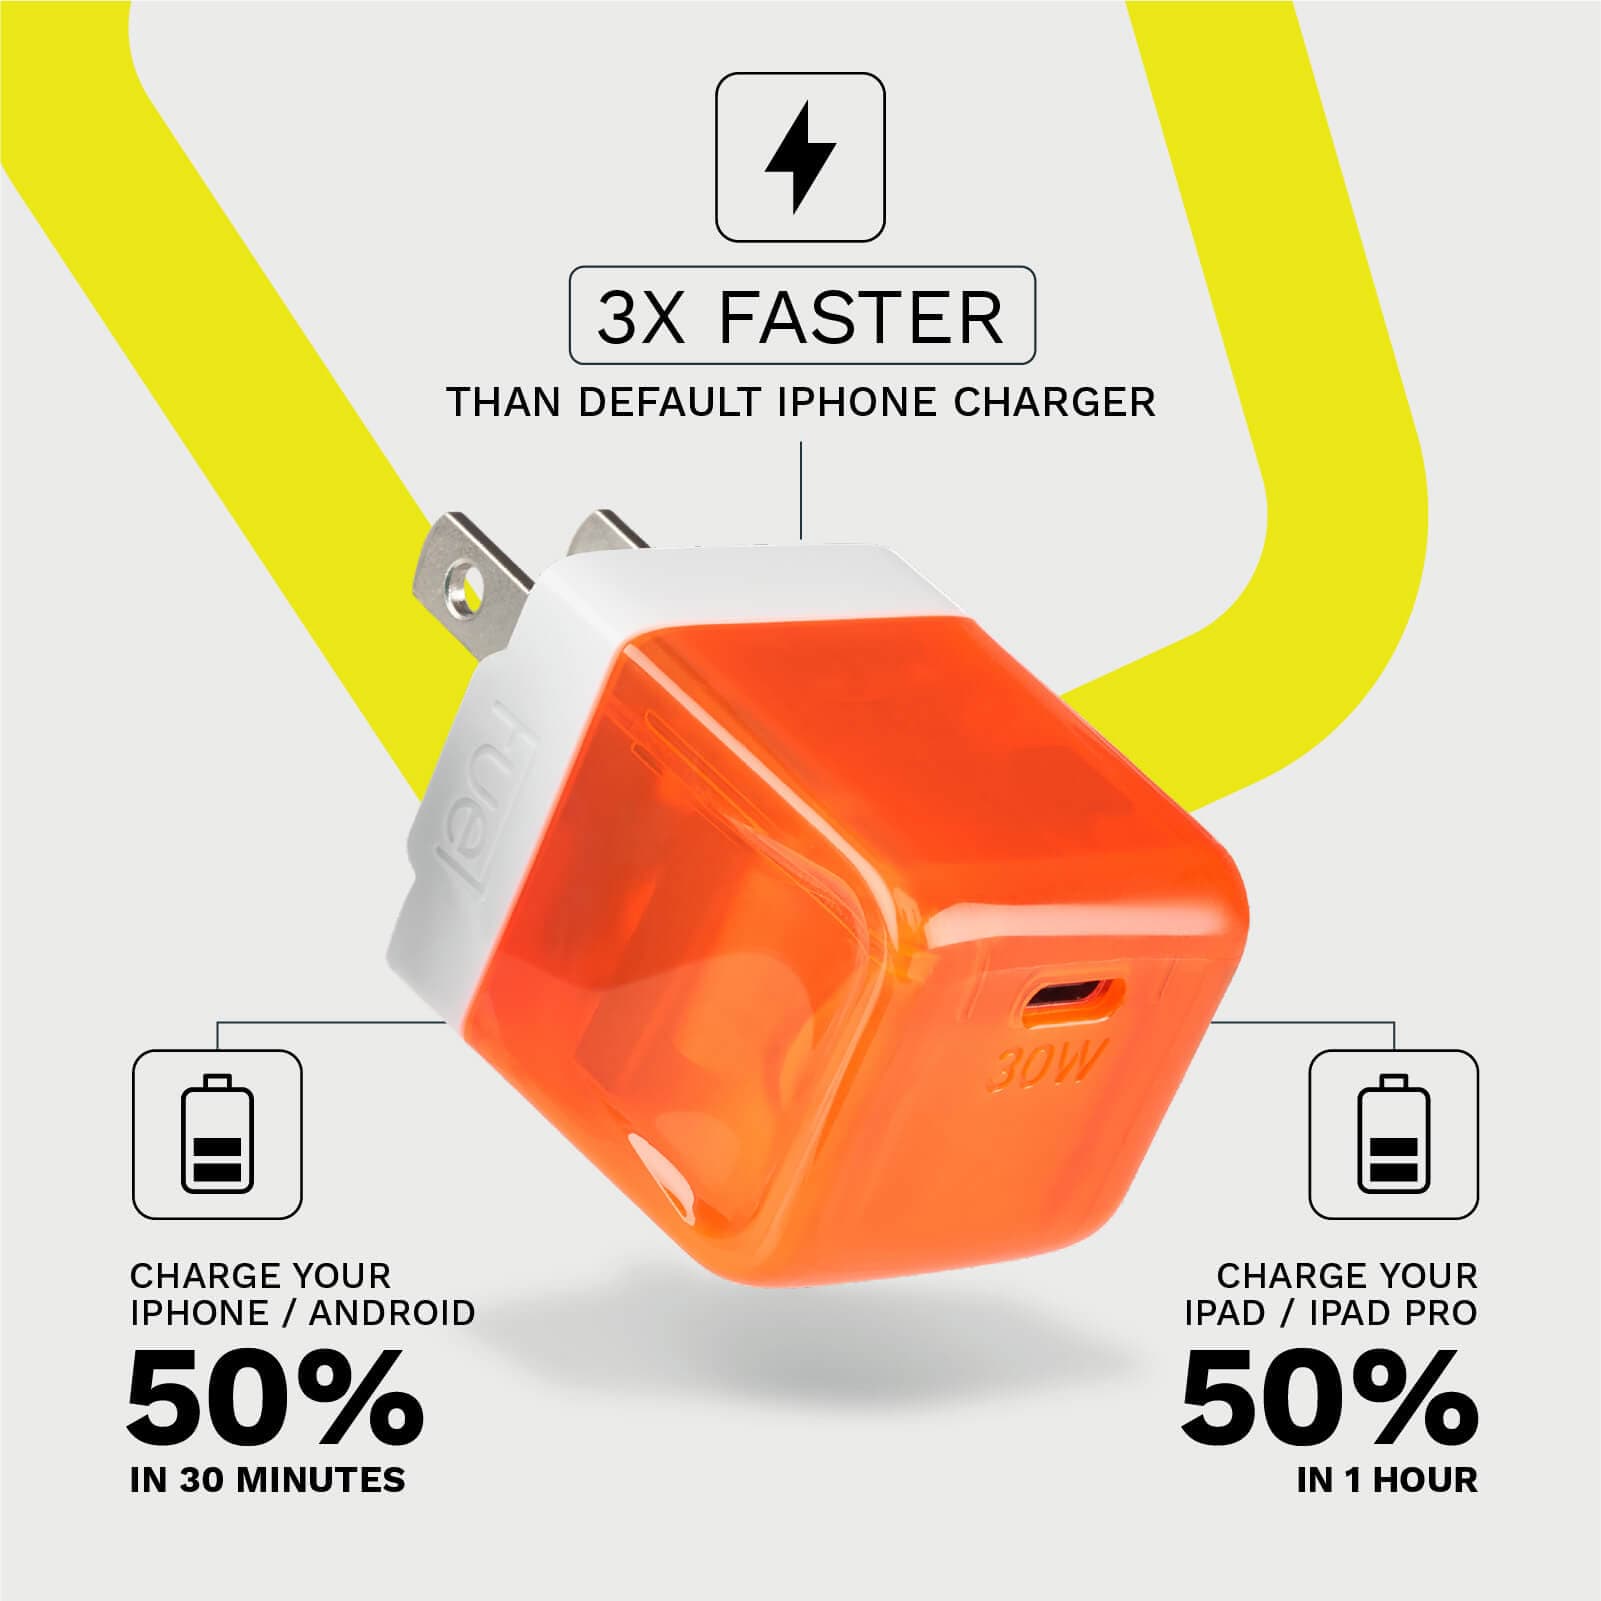 3X FASTER THAN DEFAULT IPHONE CHARGER. CHARGE YOUR IPHONE/ANDROID 50% IN 30 MINUTES OR CHARGE YOUR IPAD 50% IN 1 HOUR color::Vibrant Orange